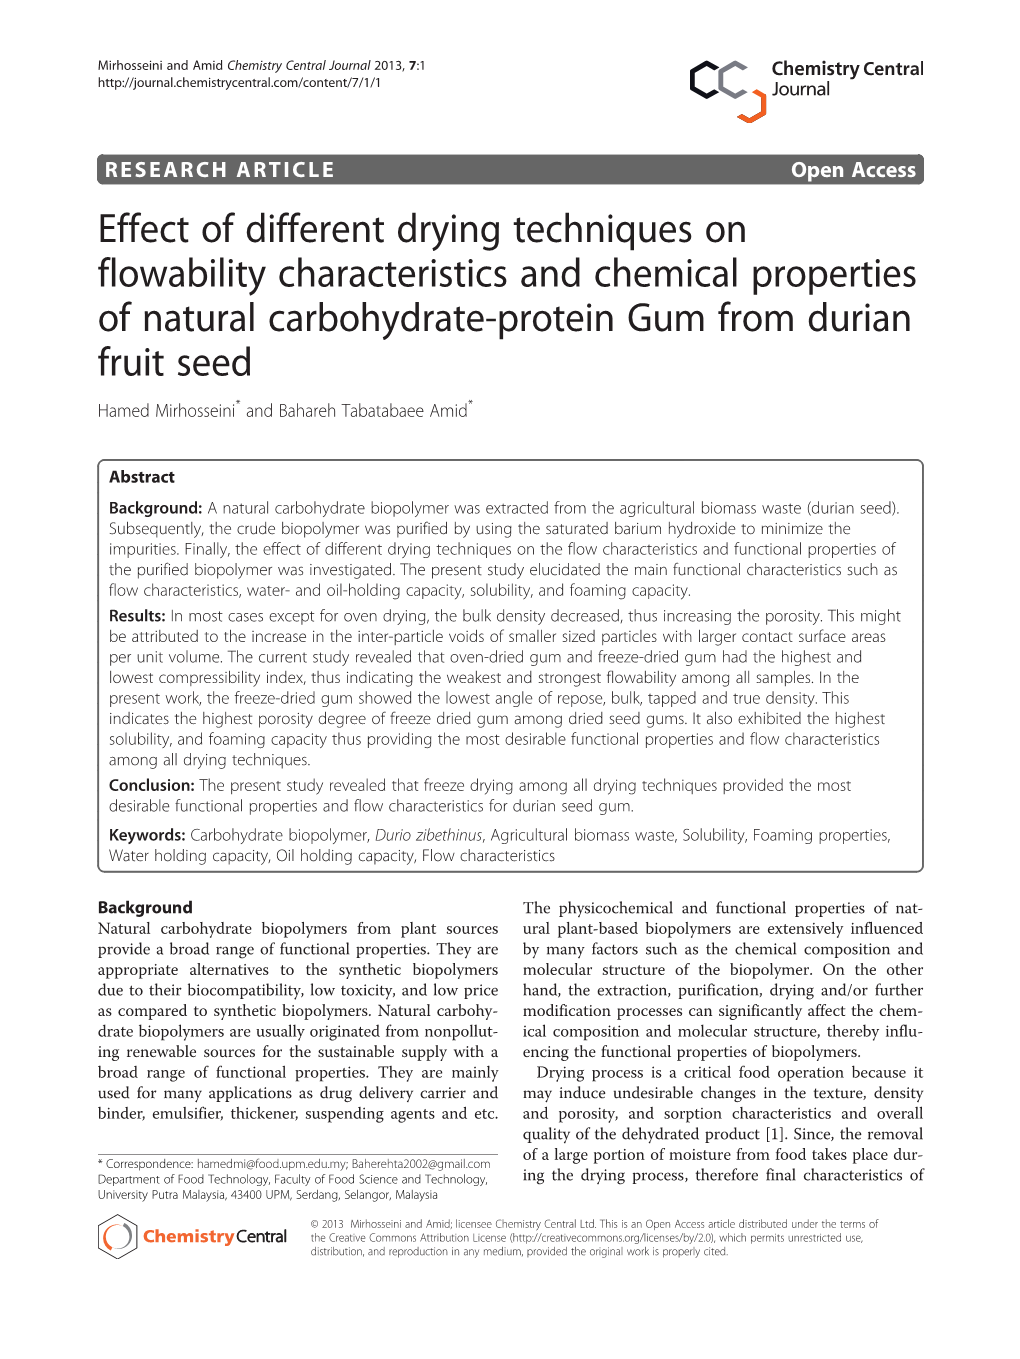 Effect of Different Drying Techniques on Flowability Characteristics and Chemical Properties of Natural Carbohydrate-Protein